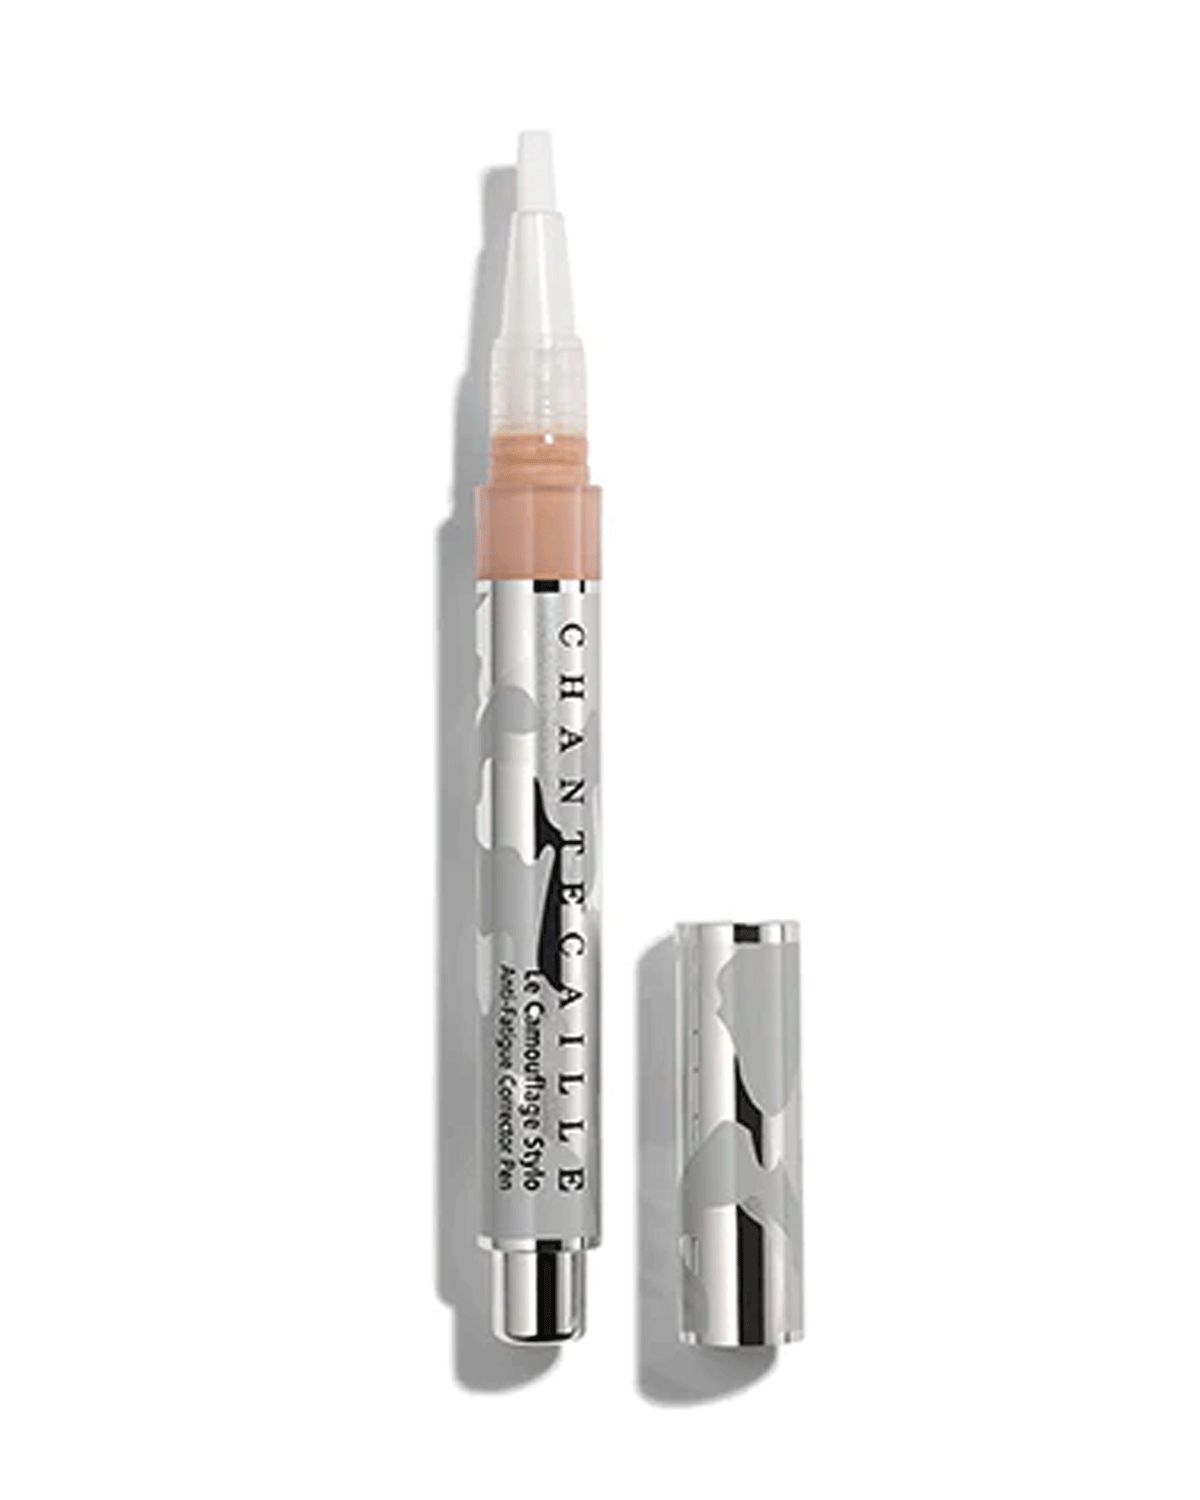 Le Camouflage Stylo in Shade 5